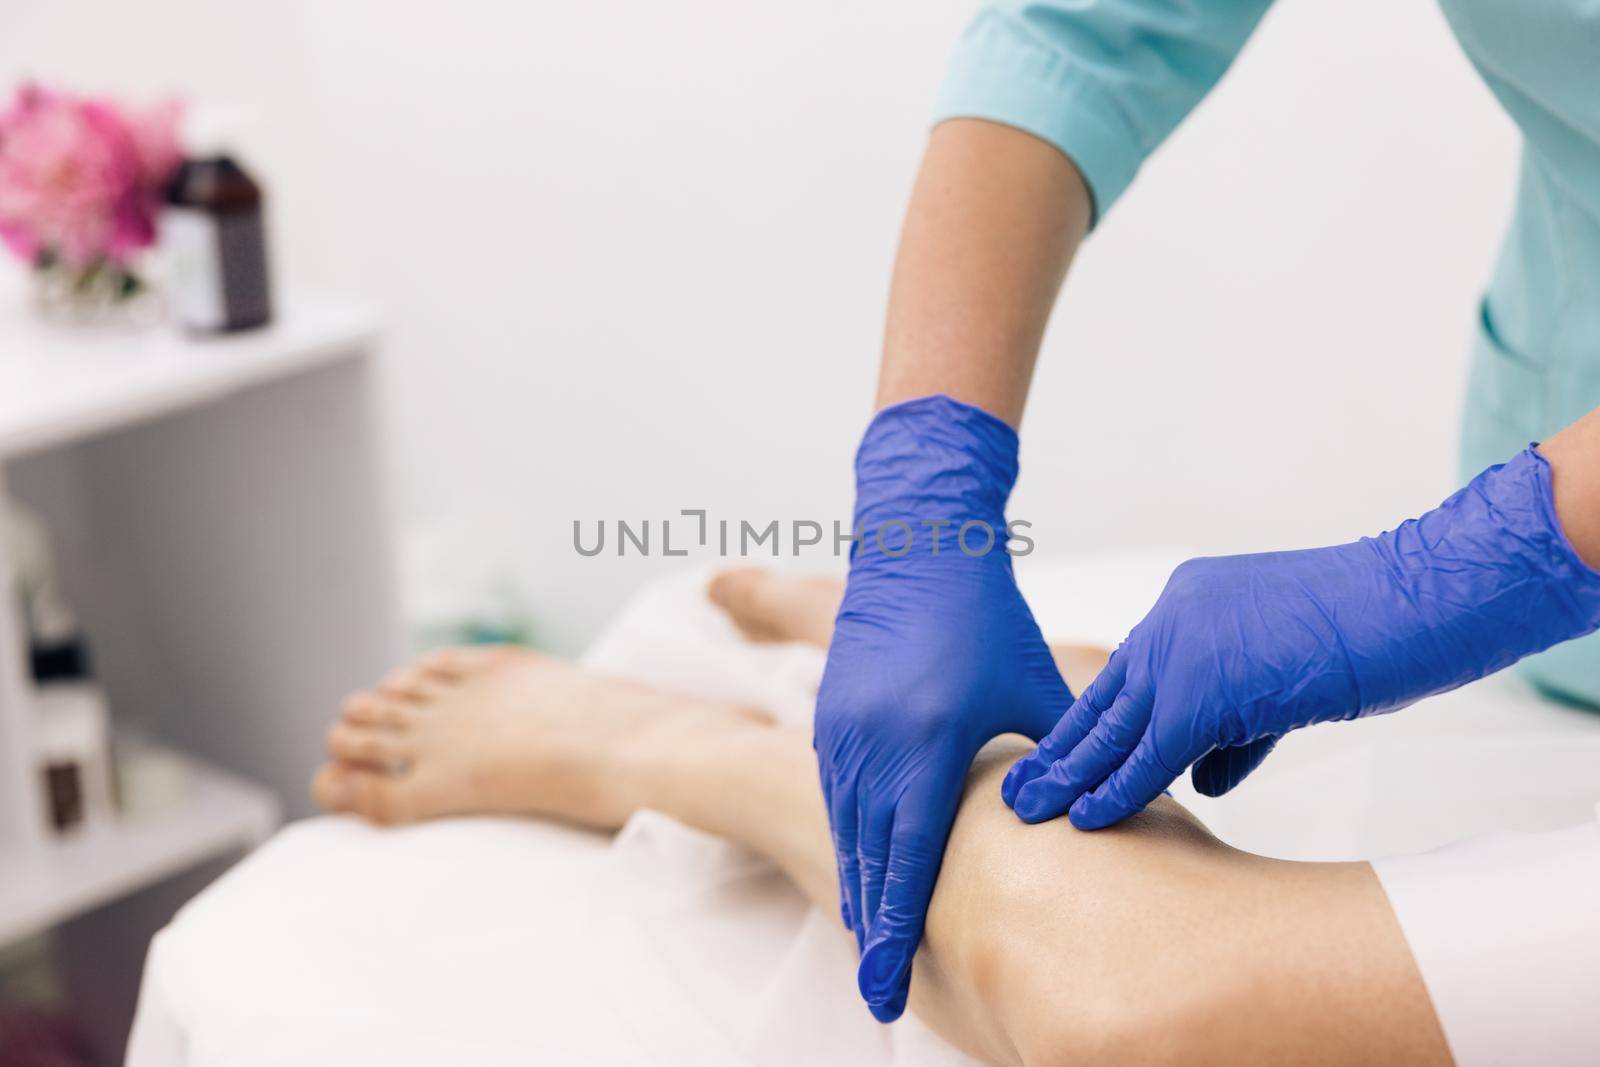 Physiotherapist worker woman assisting physical medical exercise recovery after injuries. Doctor in gloves examining painful knee of female patient leg trauma. Healthcare medical insurance concept.